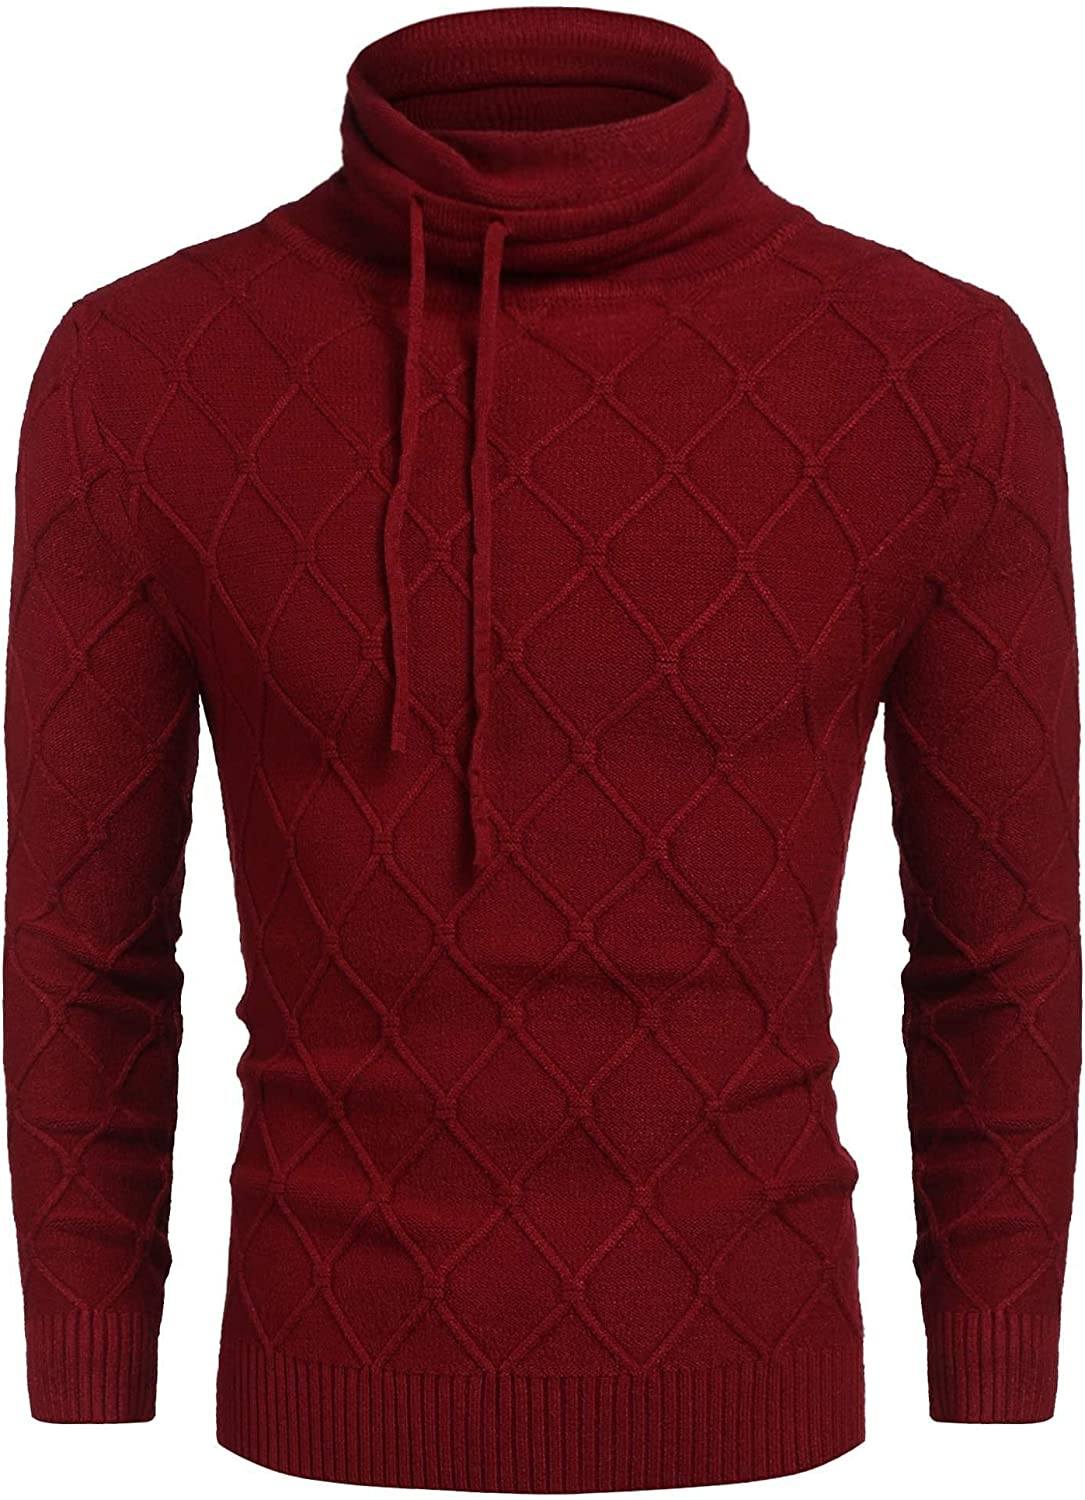 COOFANDY Men's Knitted Turtleneck Sweater Casual Thermal Long Sleeve Pullover Pullovers COOFANDY Store Red Small 